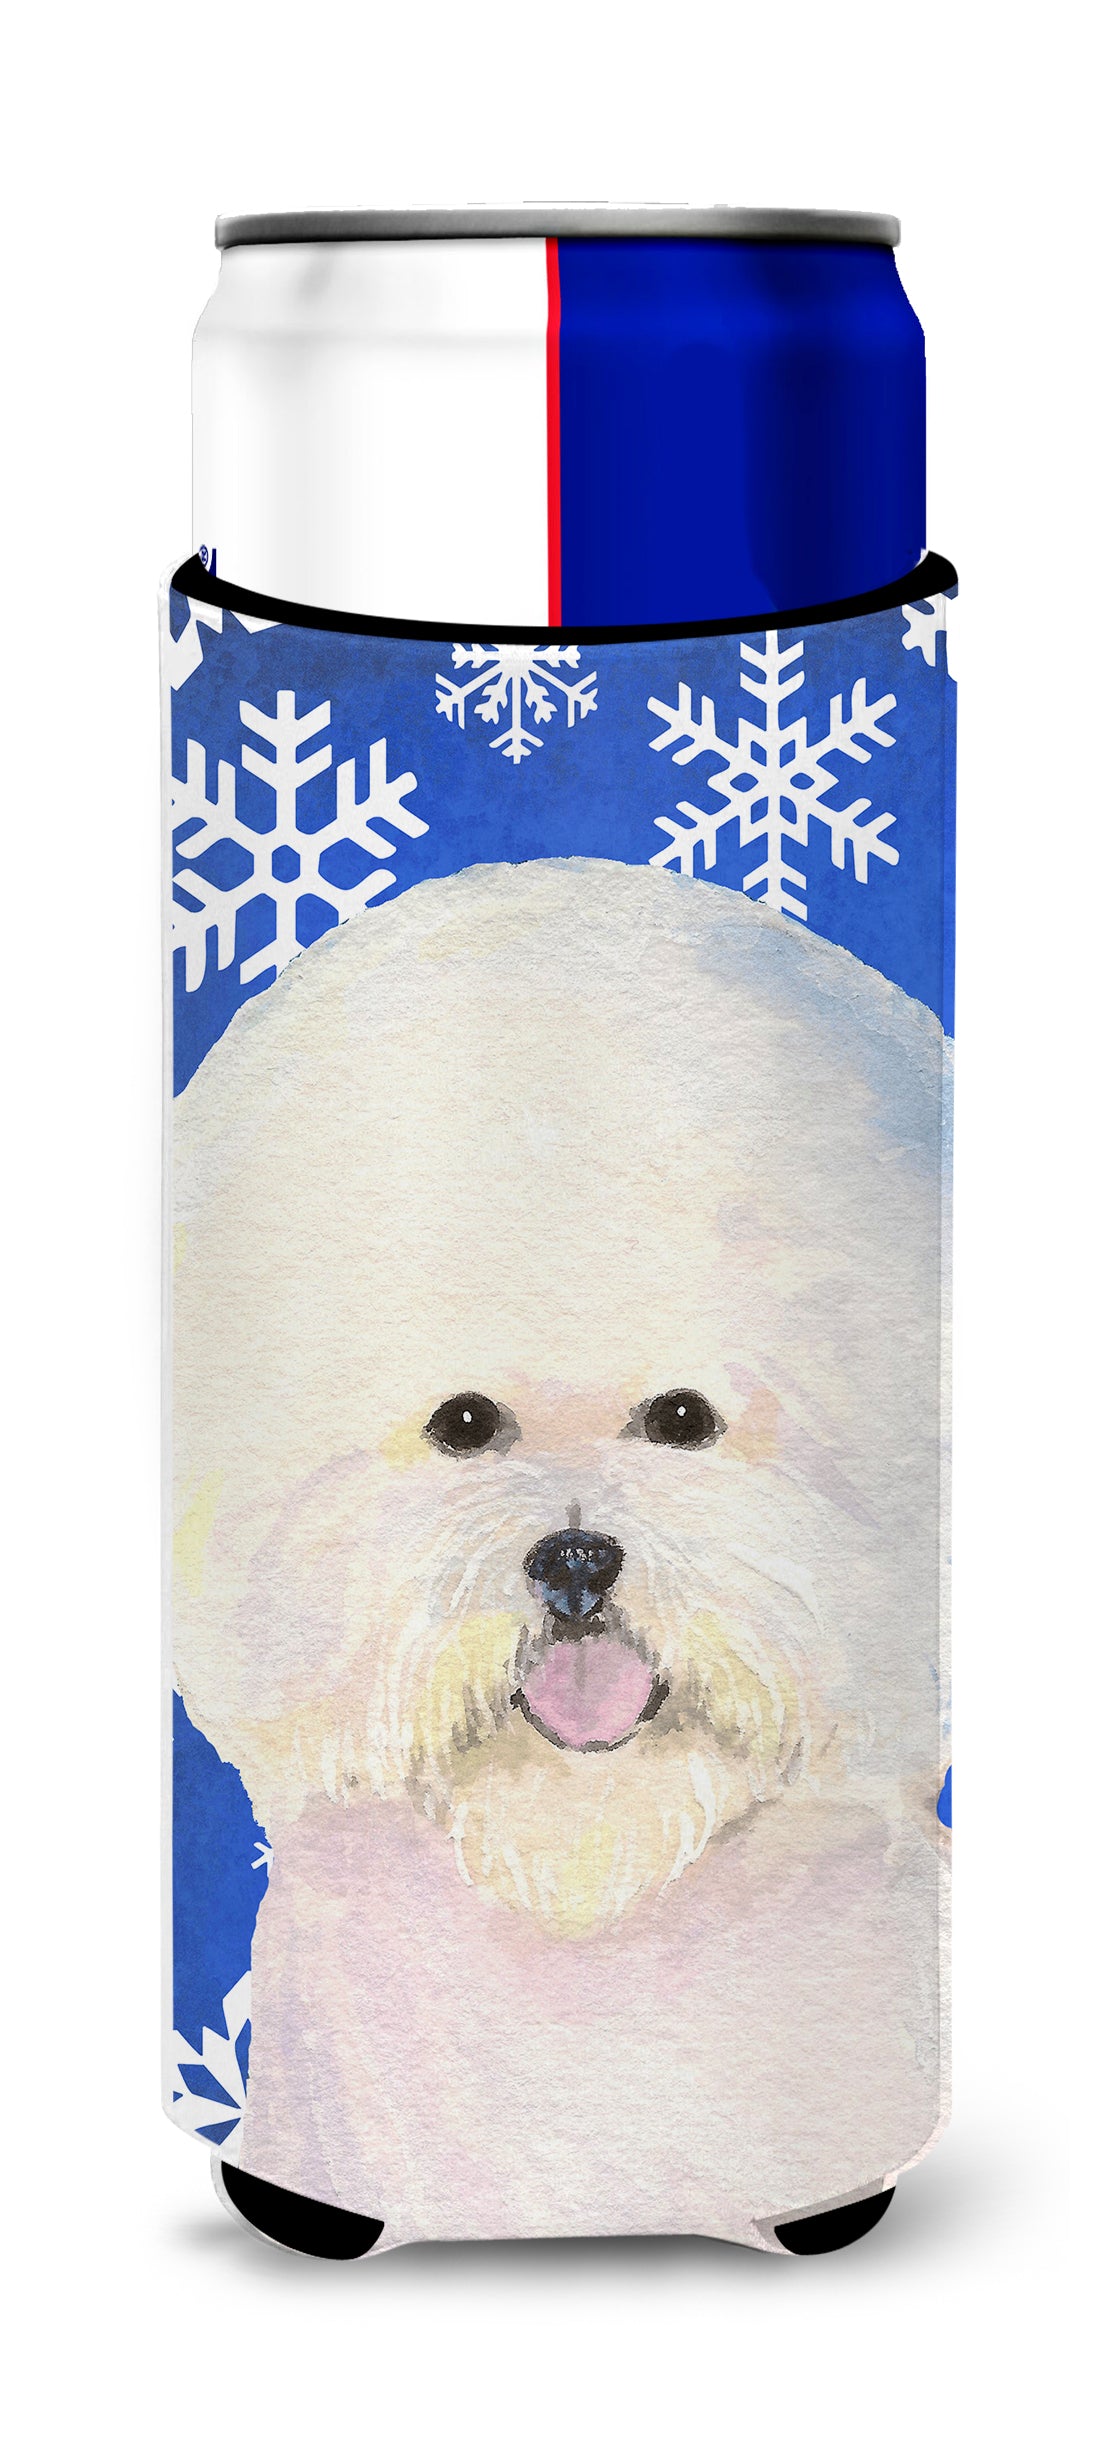 Bichon Frise Winter Snowflakes Holiday Ultra Beverage Insulators for slim cans SS4664MUK